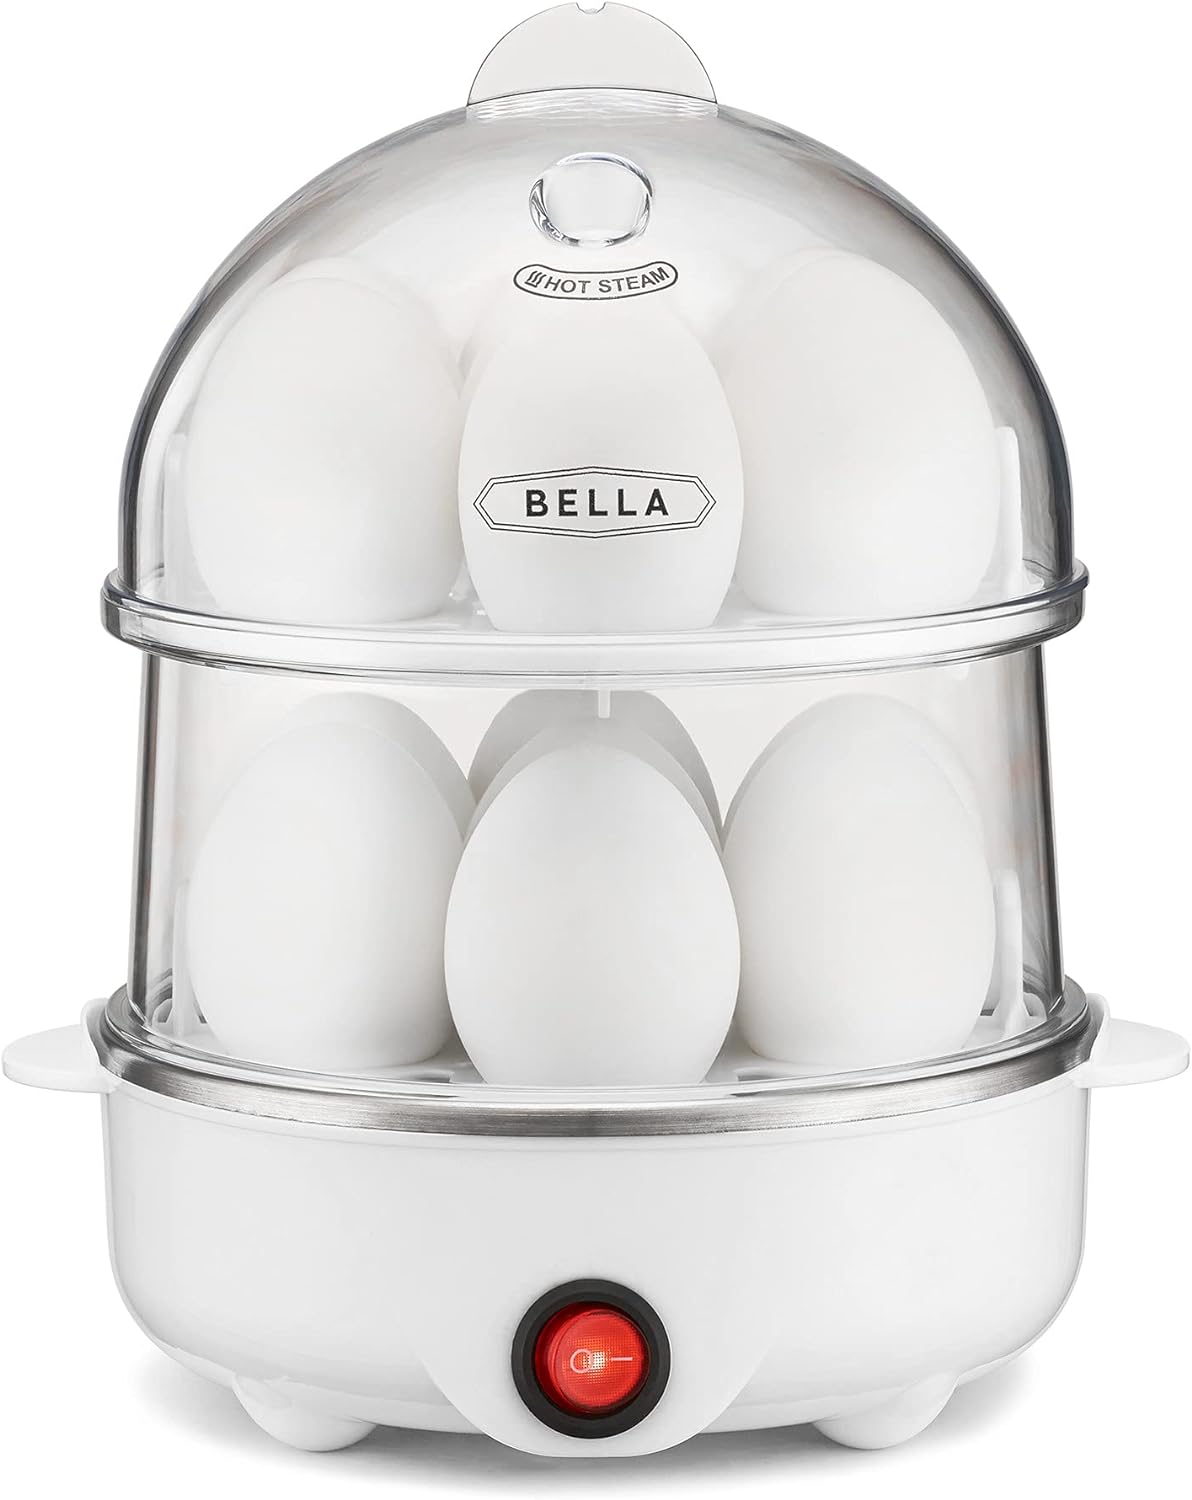 BELLA Rapid Electric Egg Cooker and Poacher with Auto Shut Off for Omelet, Soft, Medium and Hard Boiled Eggs - 14 Egg Capacity Tray, Double Stack, White